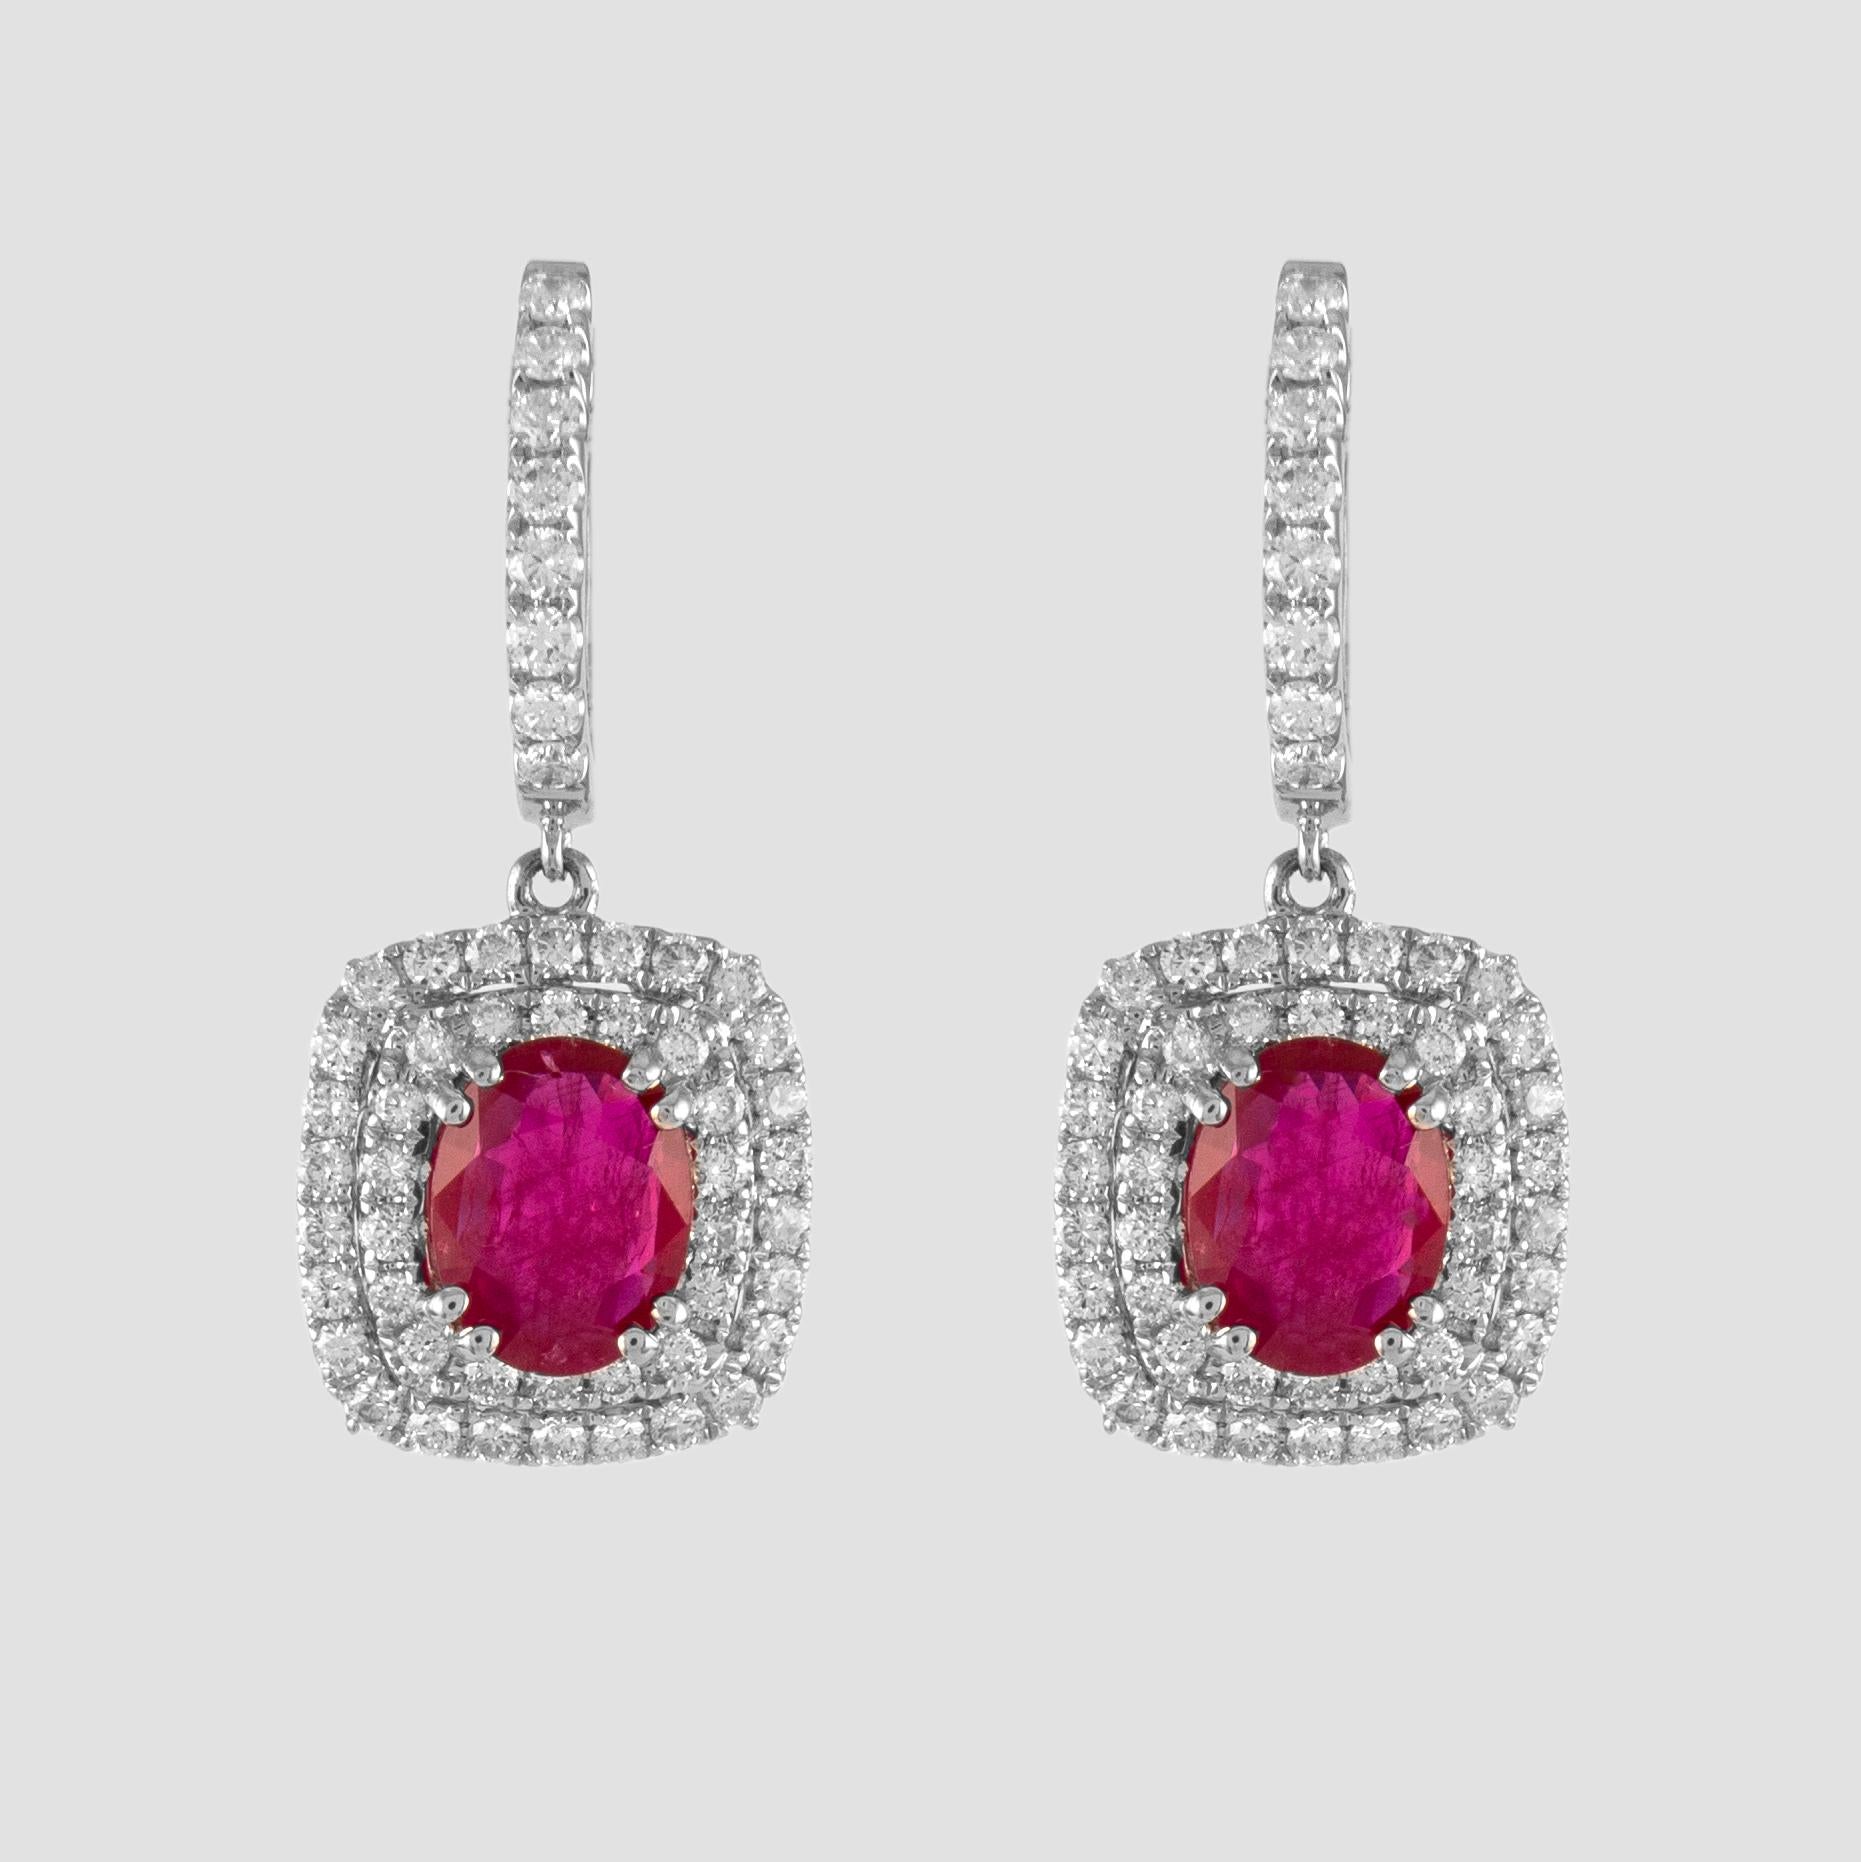 Sensational ruby and double diamond drop earrings.
2 oval rubies, 2.48 carats total. Complimented by 104 round brilliant diamonds, 1.15 carats. Approximately G/H color and SI clarity. 18k white gold. 
3.63ct total gemstone weight. 
Accommodated with